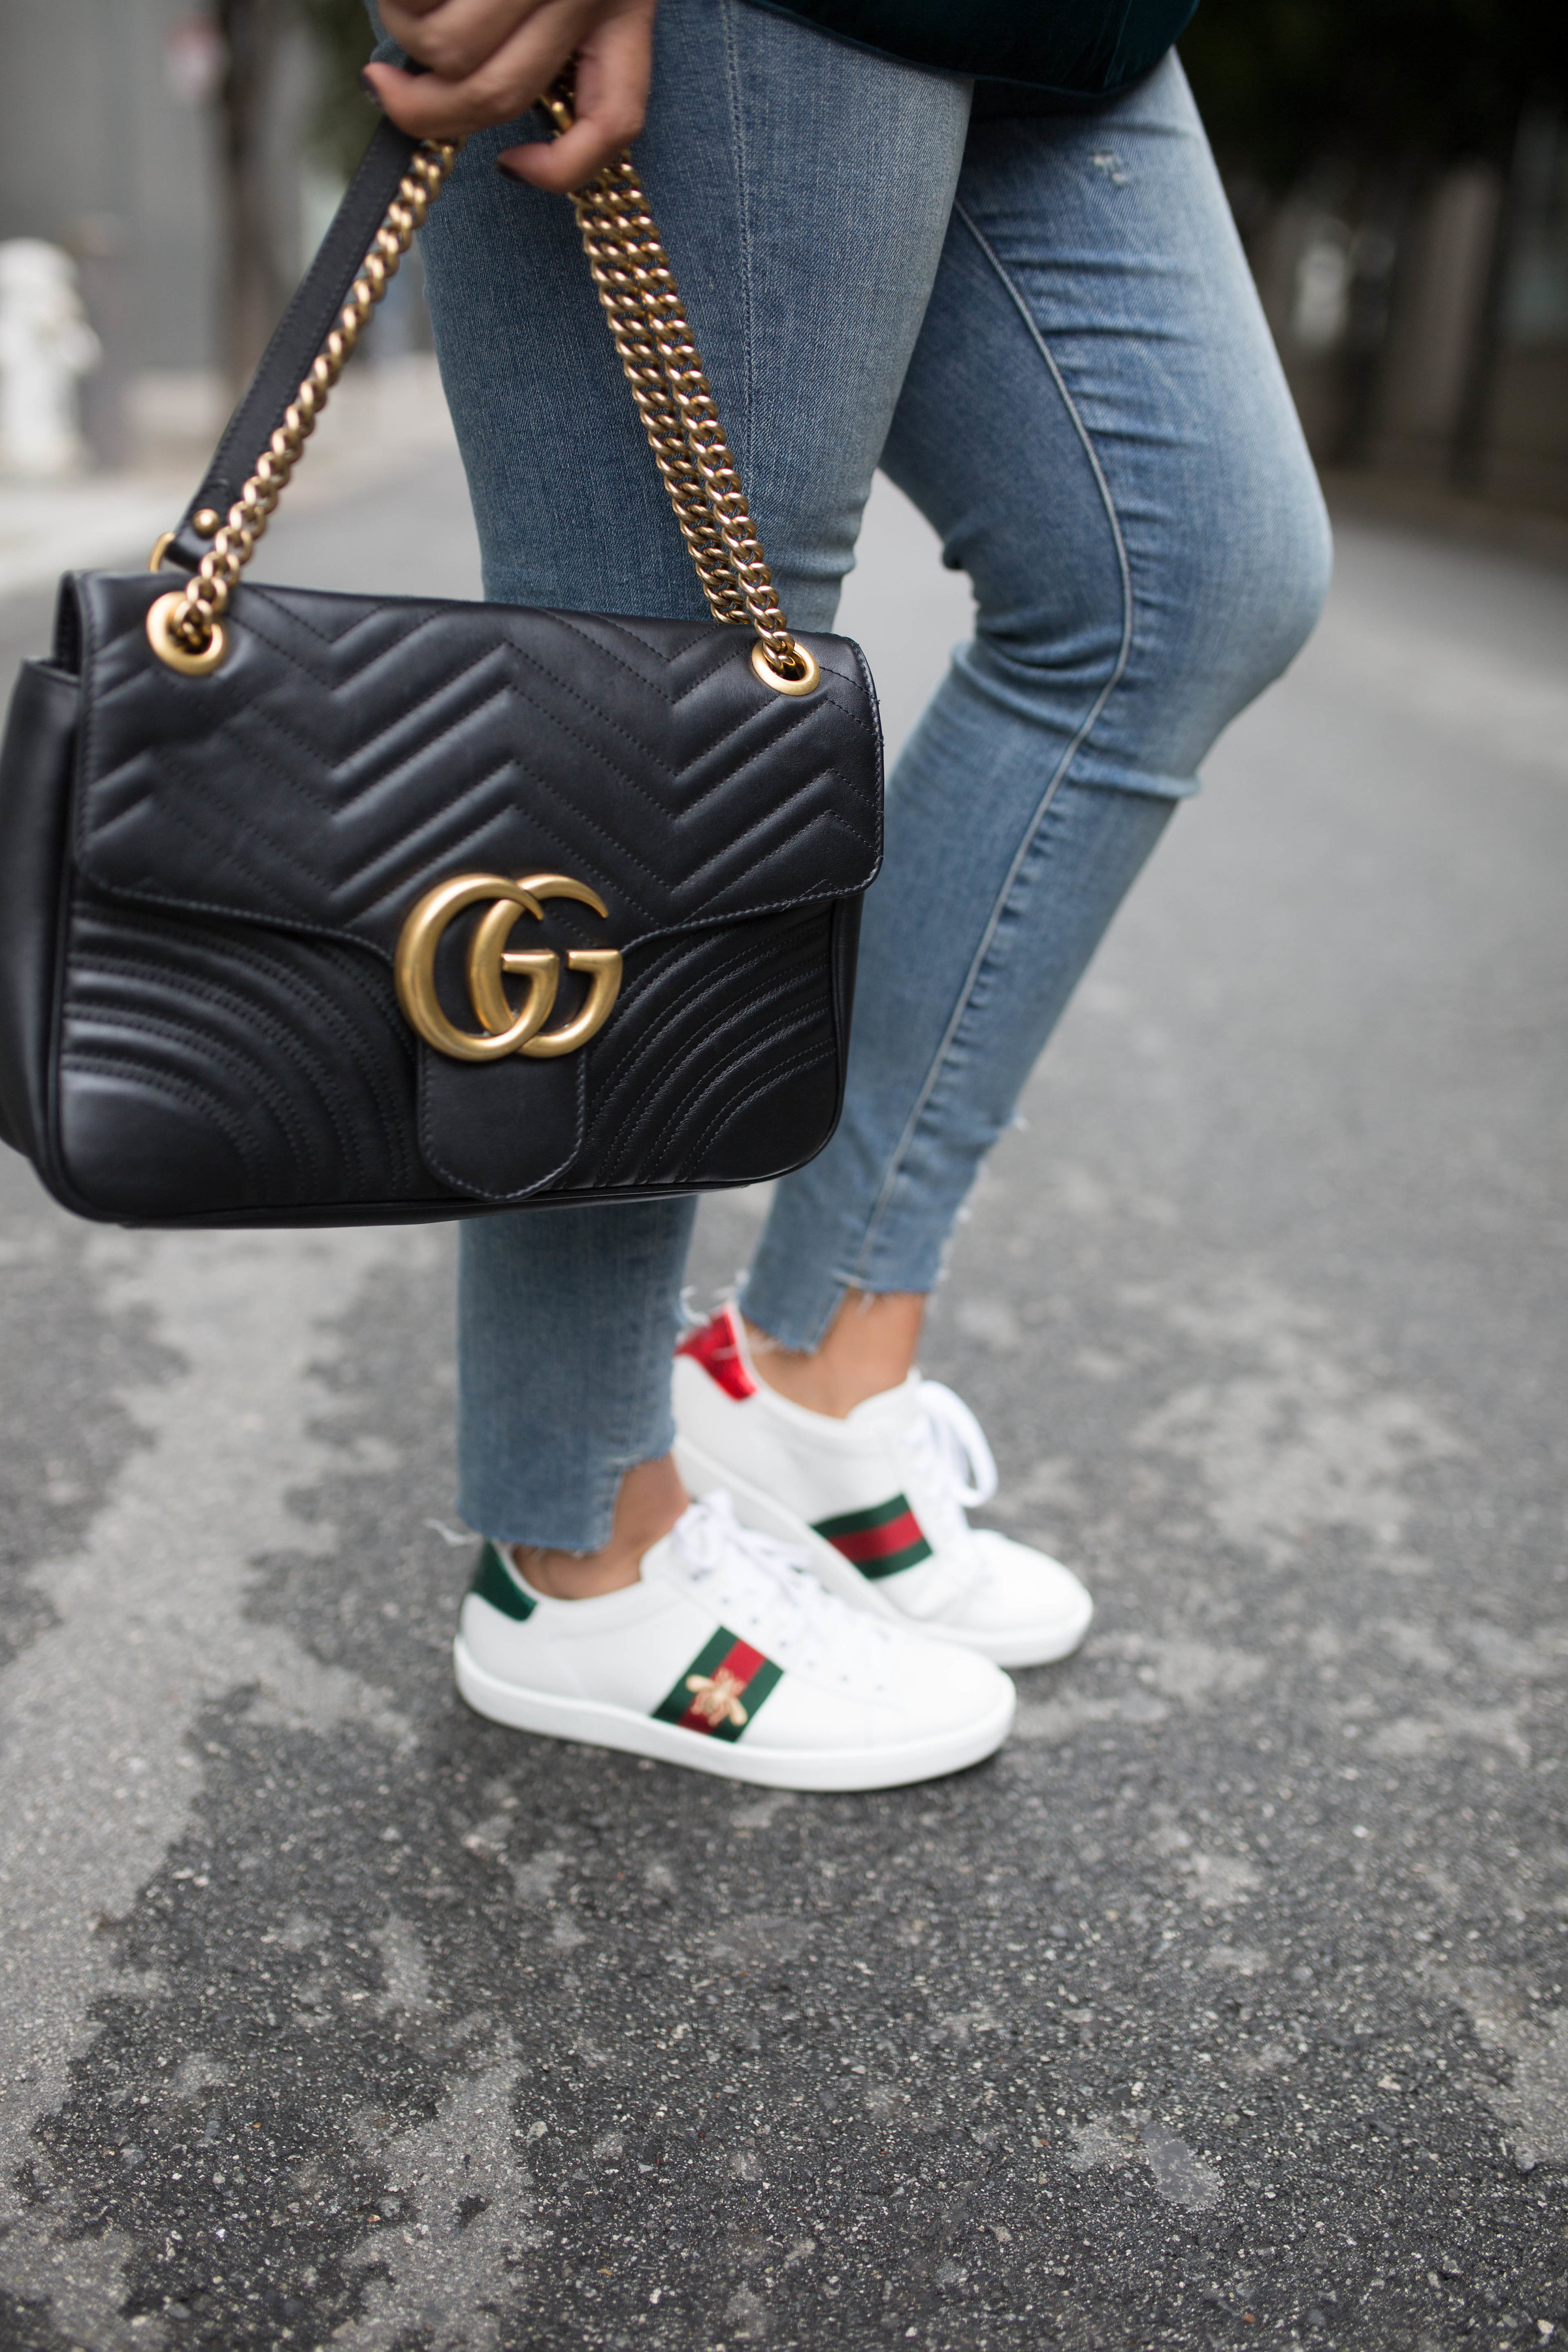 Ashley Zeal from Two Peas in a Prada shares how to clean Gucci sneakers. She is using Jason Markk shoes